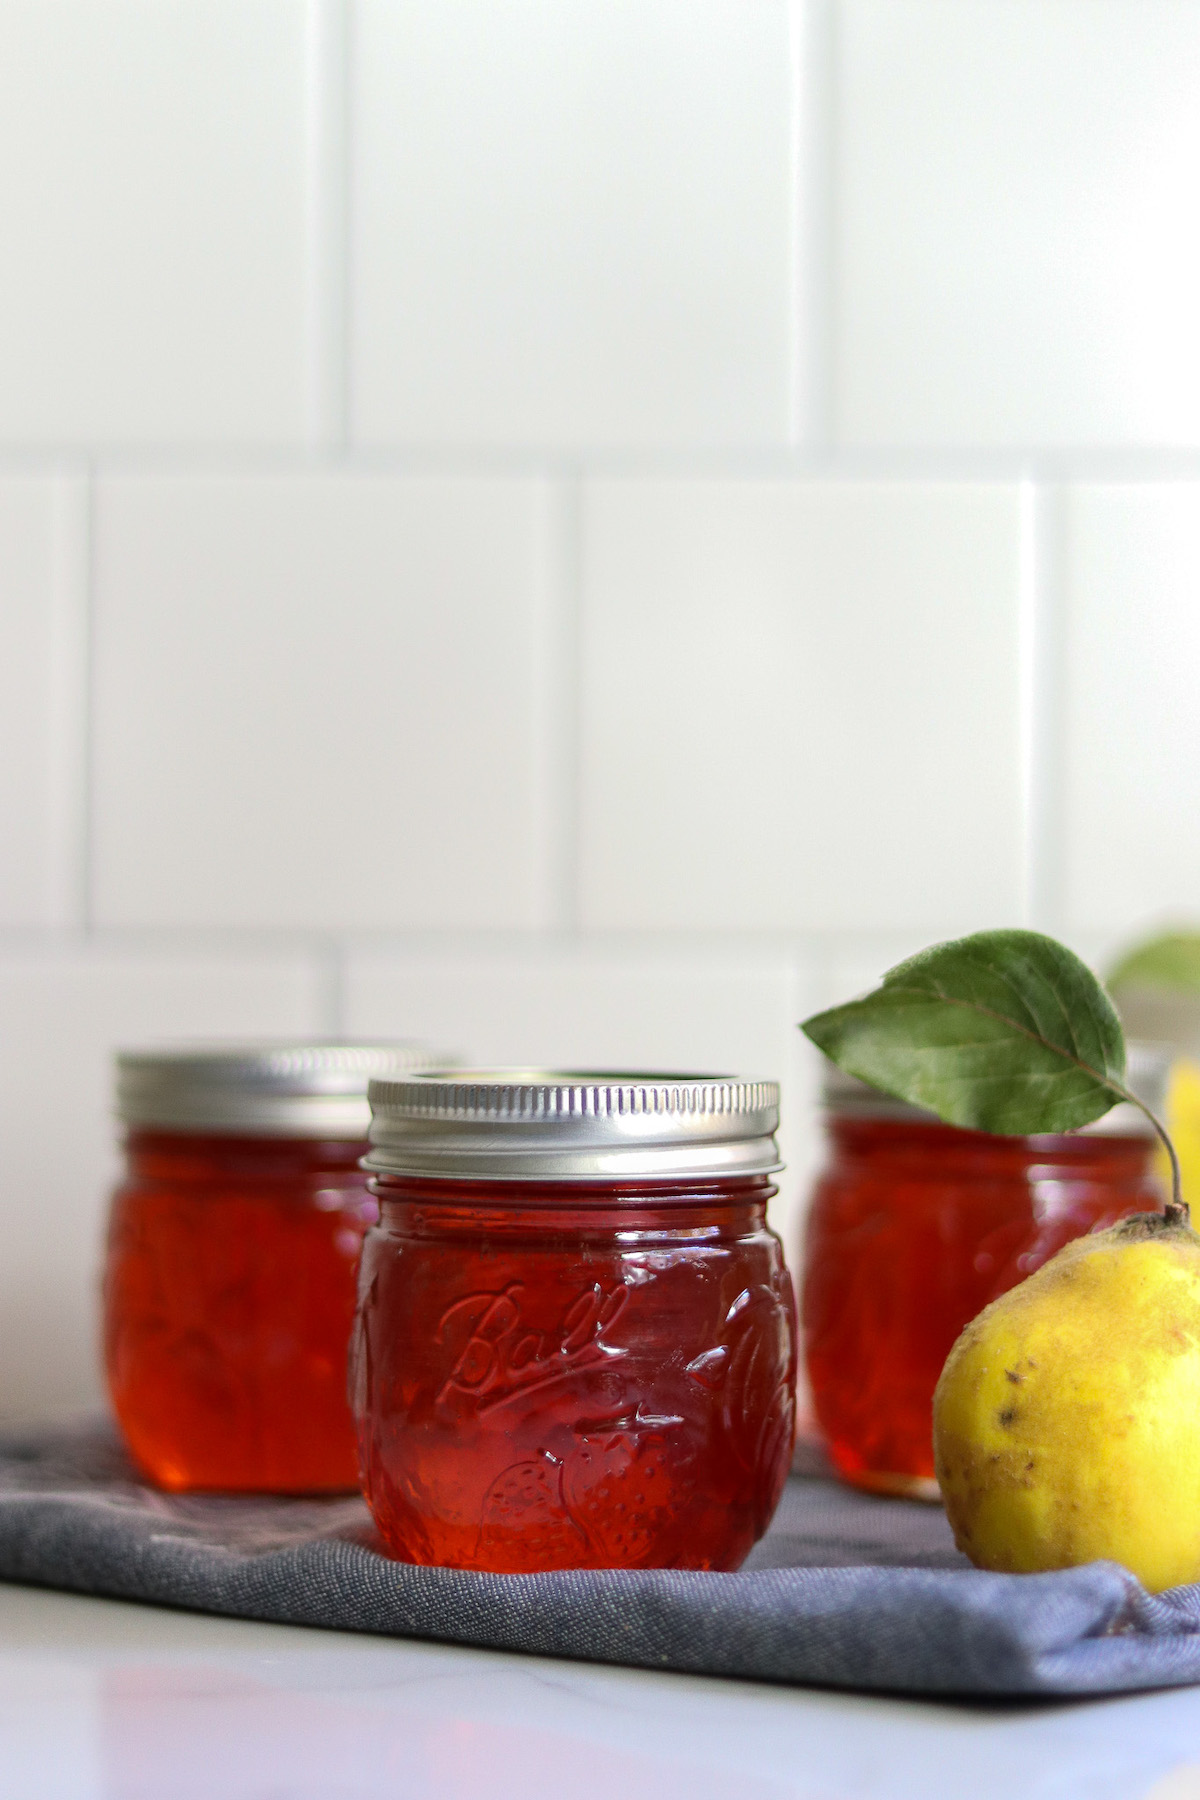 Homemade Quince Jelly